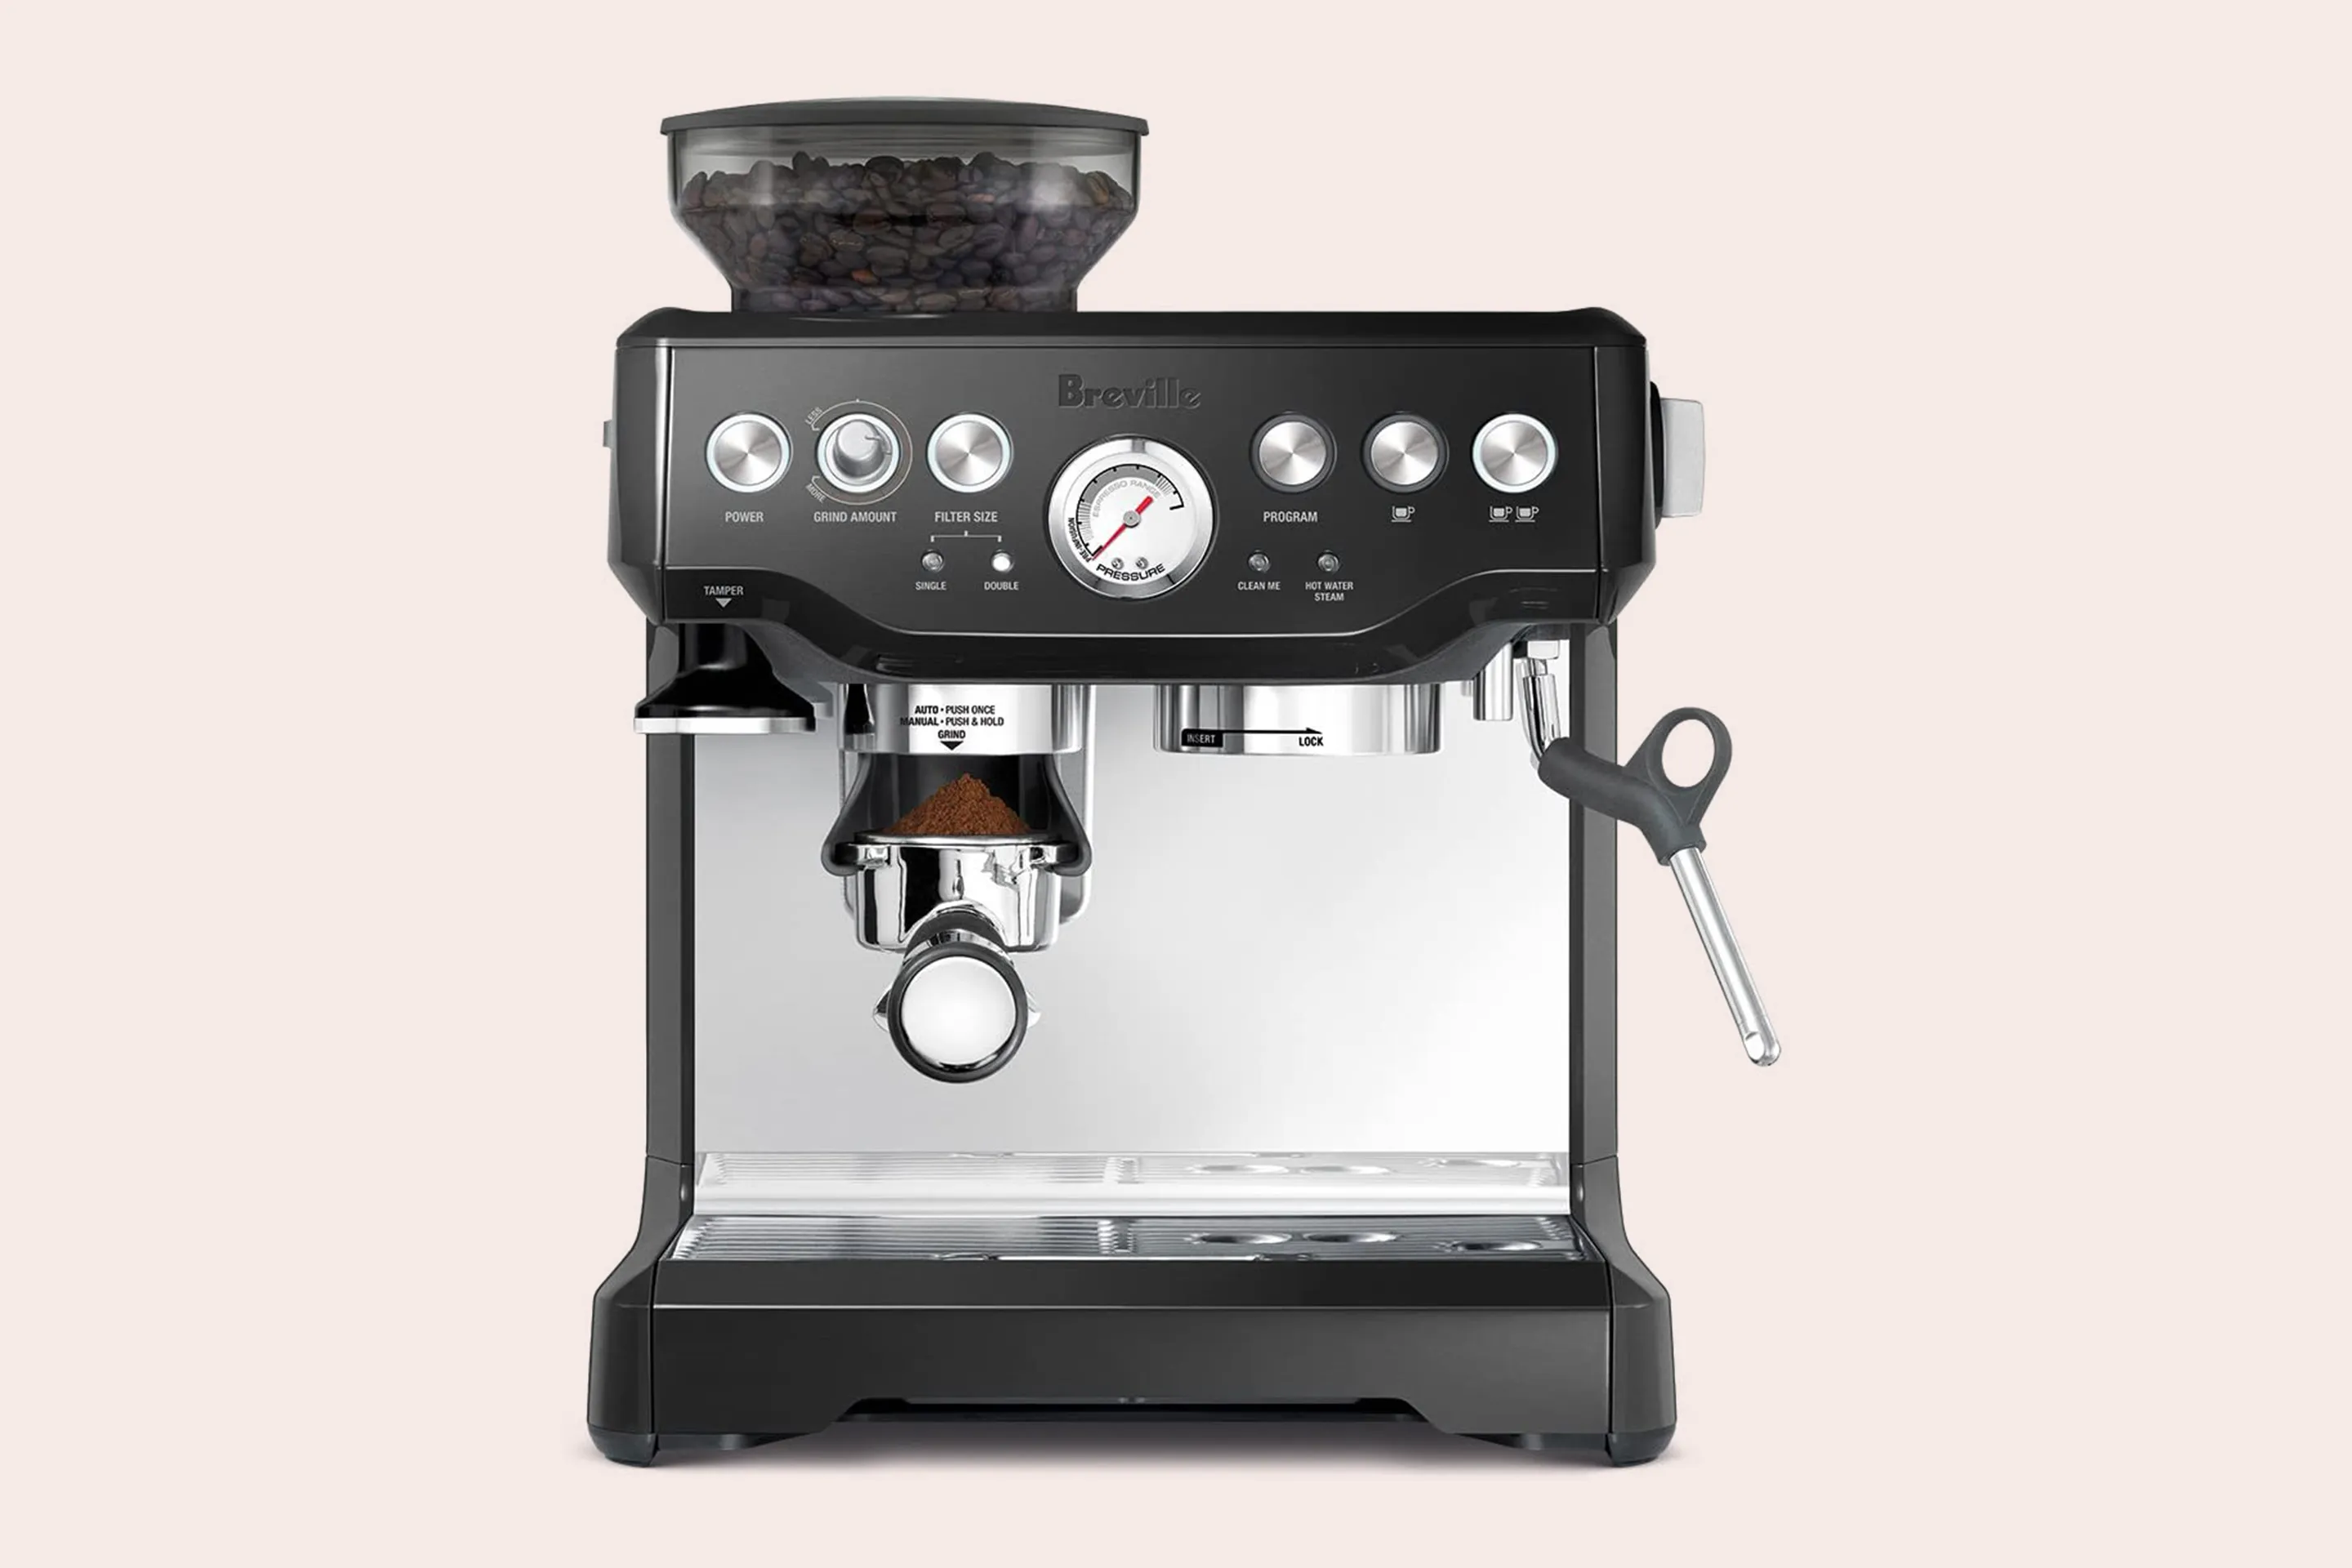 Who Has the Longest Breville Extended Warranties or Protection